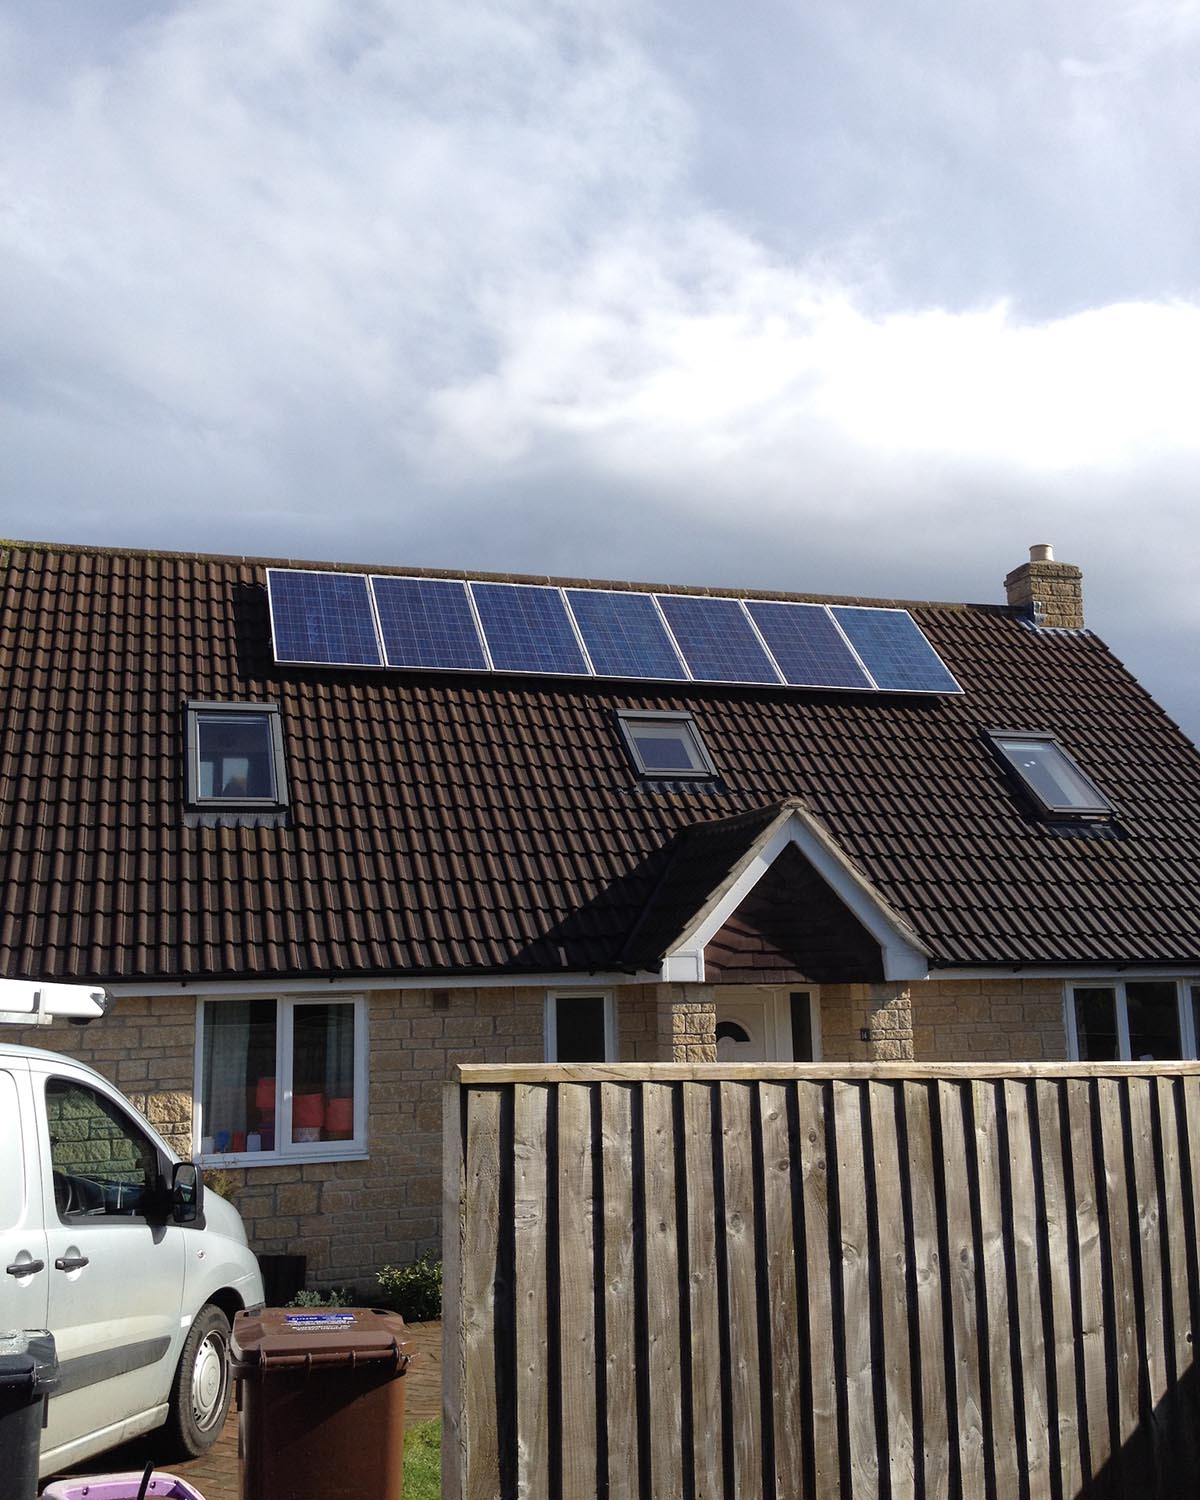 solar panels on roof of house. NBG Digital Home. Electric Vehicle chargers, Solar and Heat Pumps, General Electrical Services in the South West.